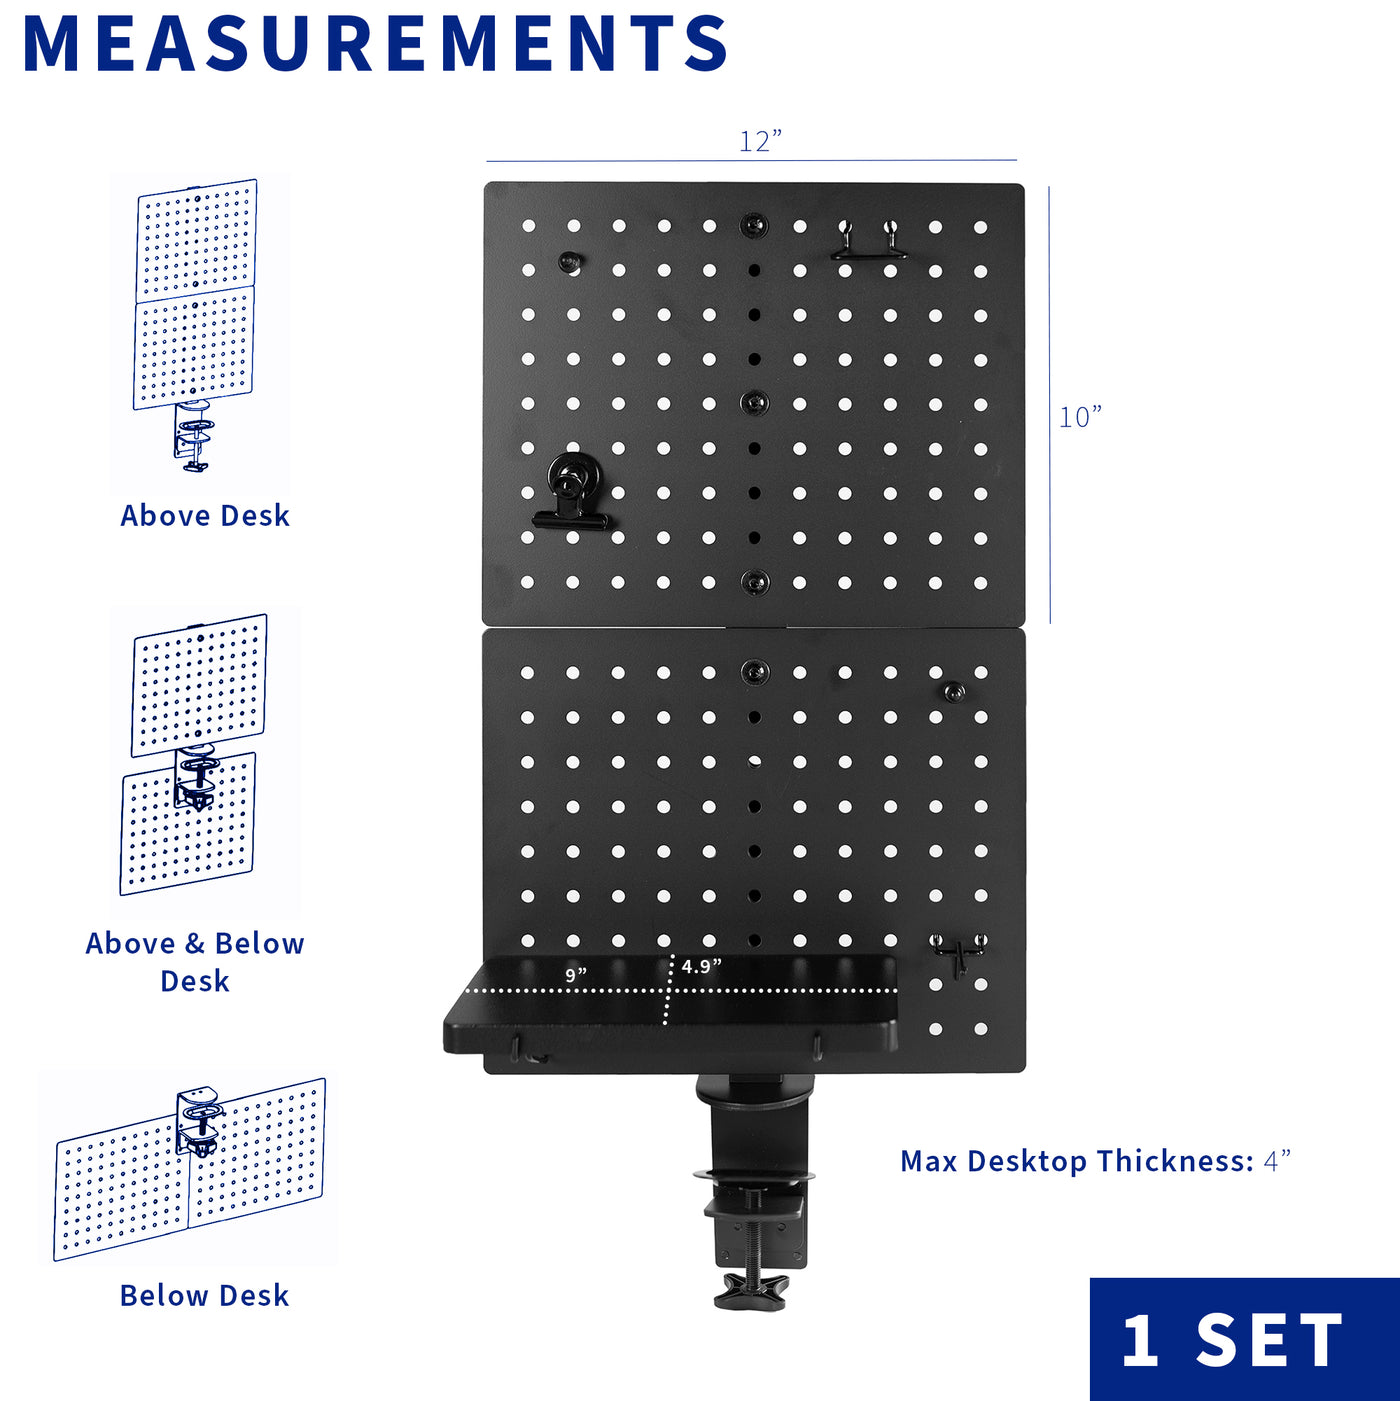 Measurements of above or below desk clamp-on panel accessory.